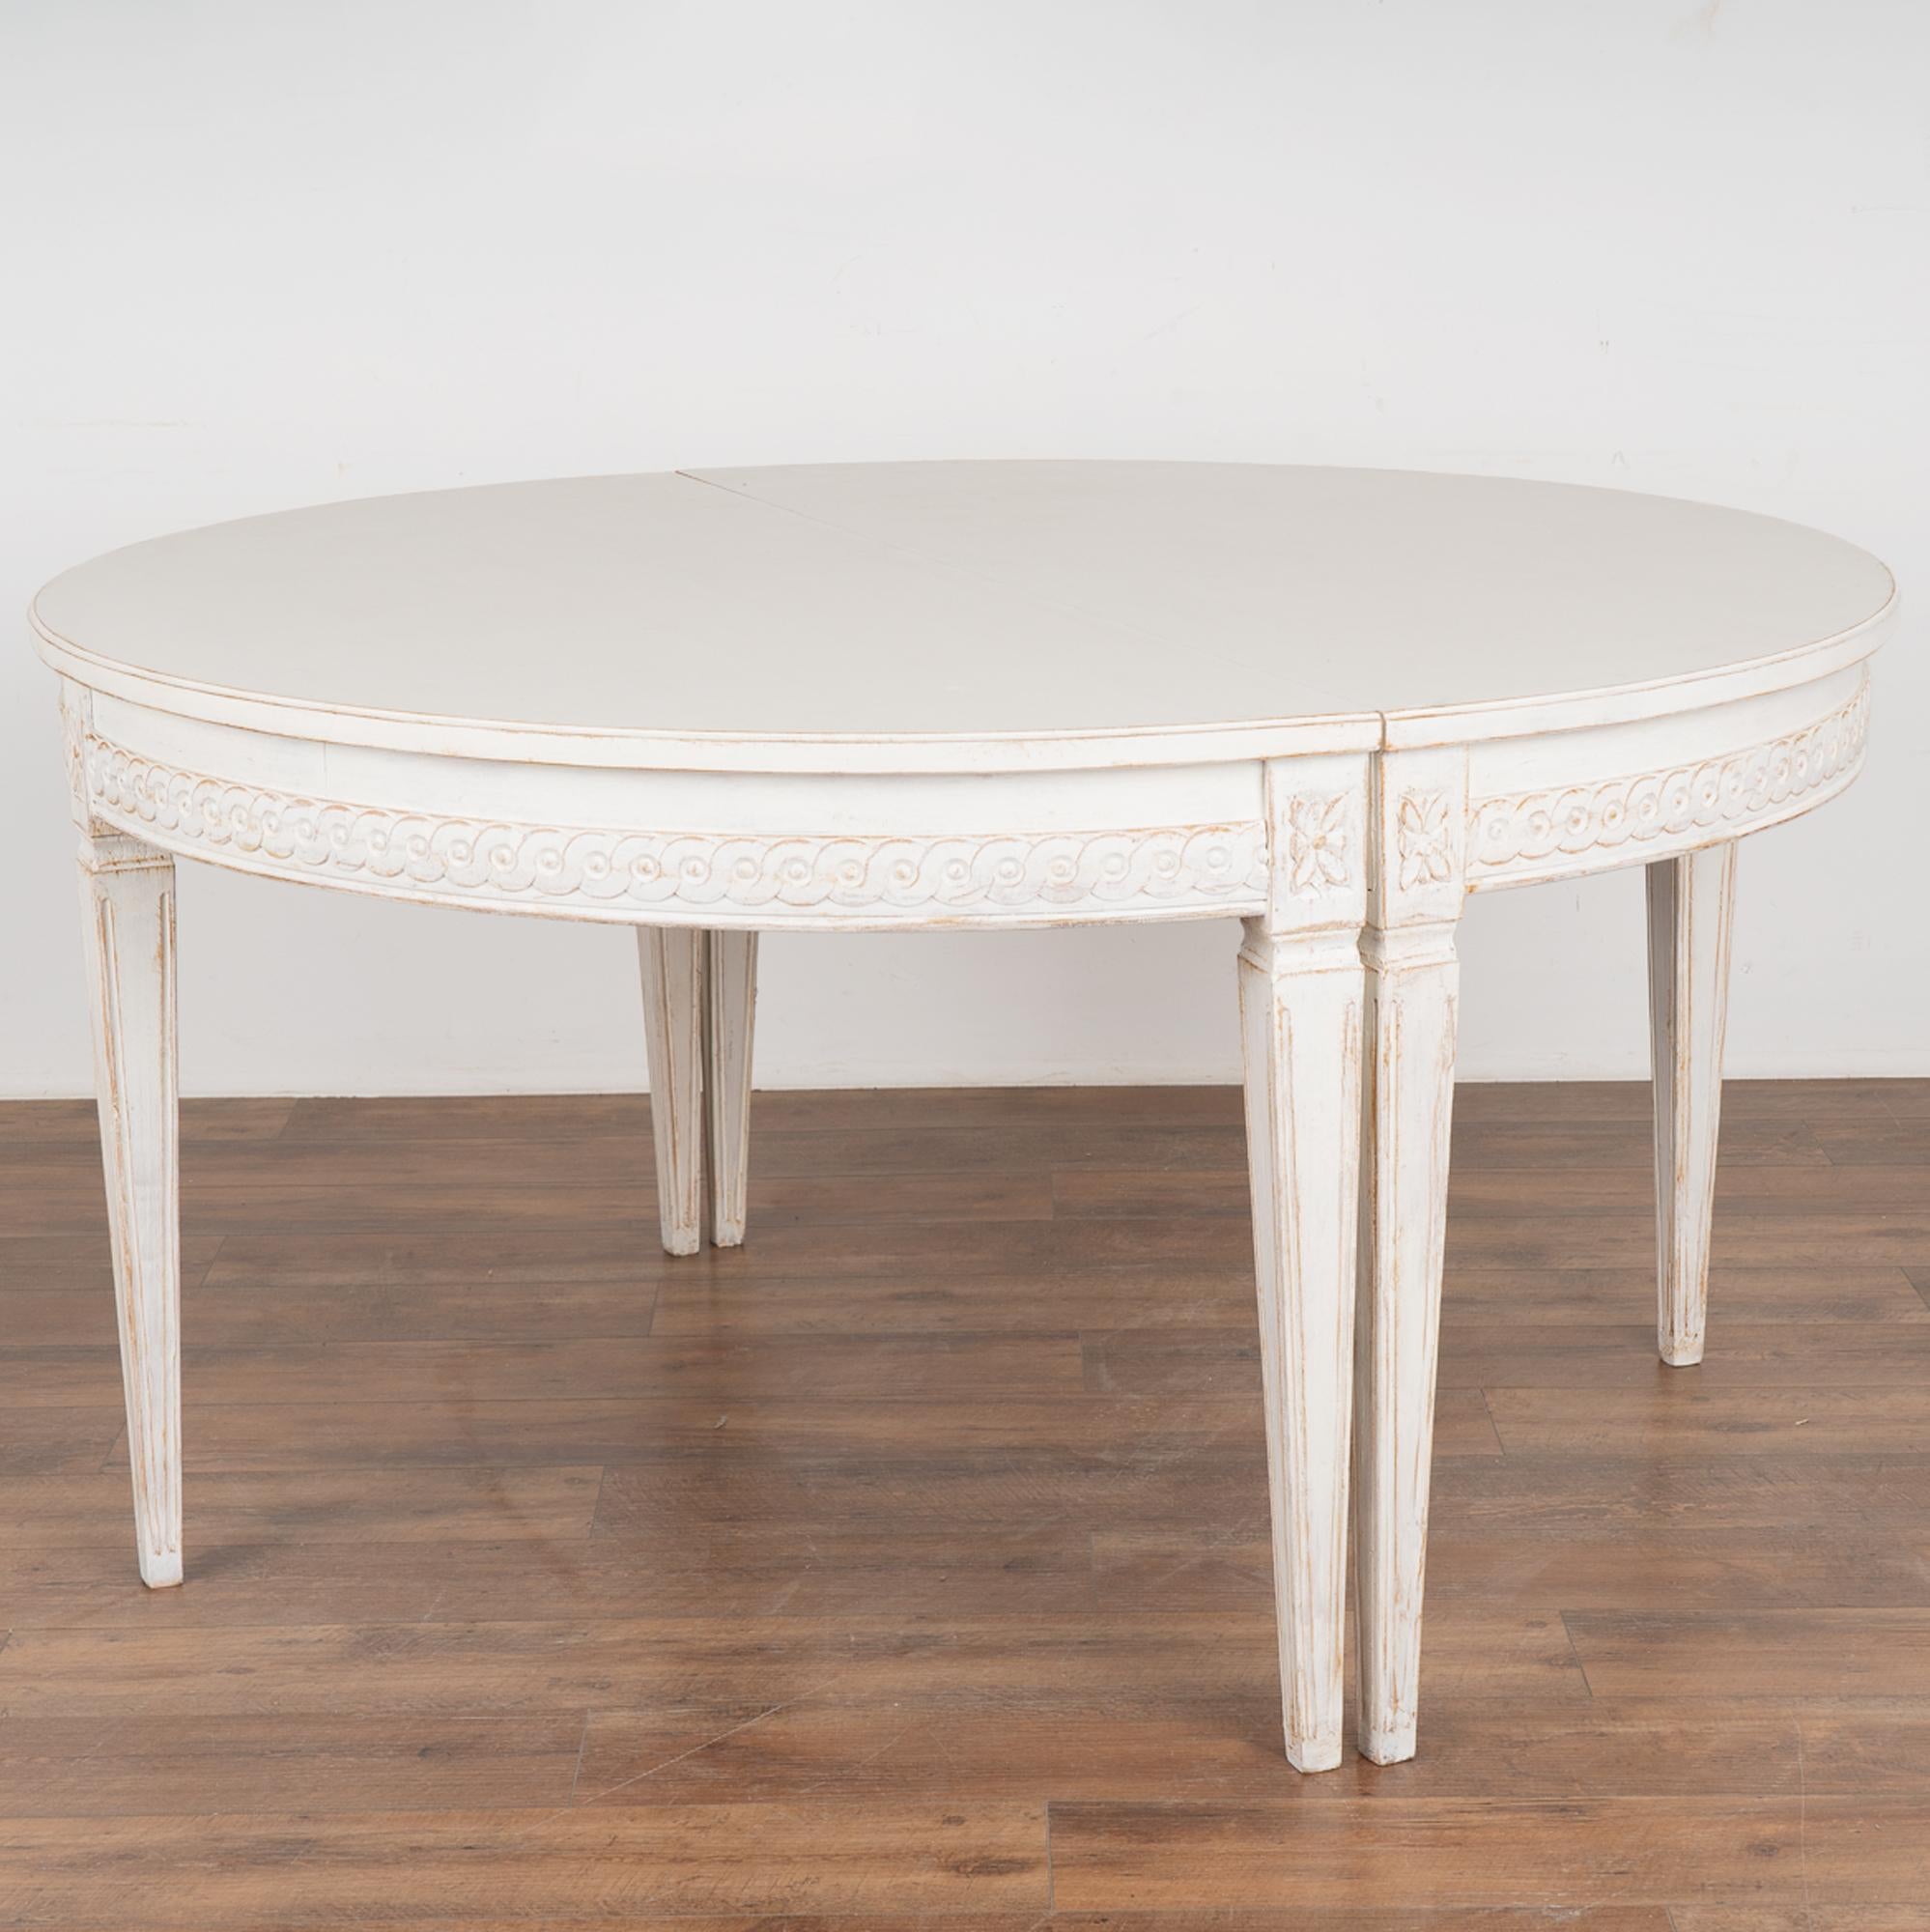 Gustavian White Oval Dining Table With Three Leaves, Sweden circa 1860-80 For Sale